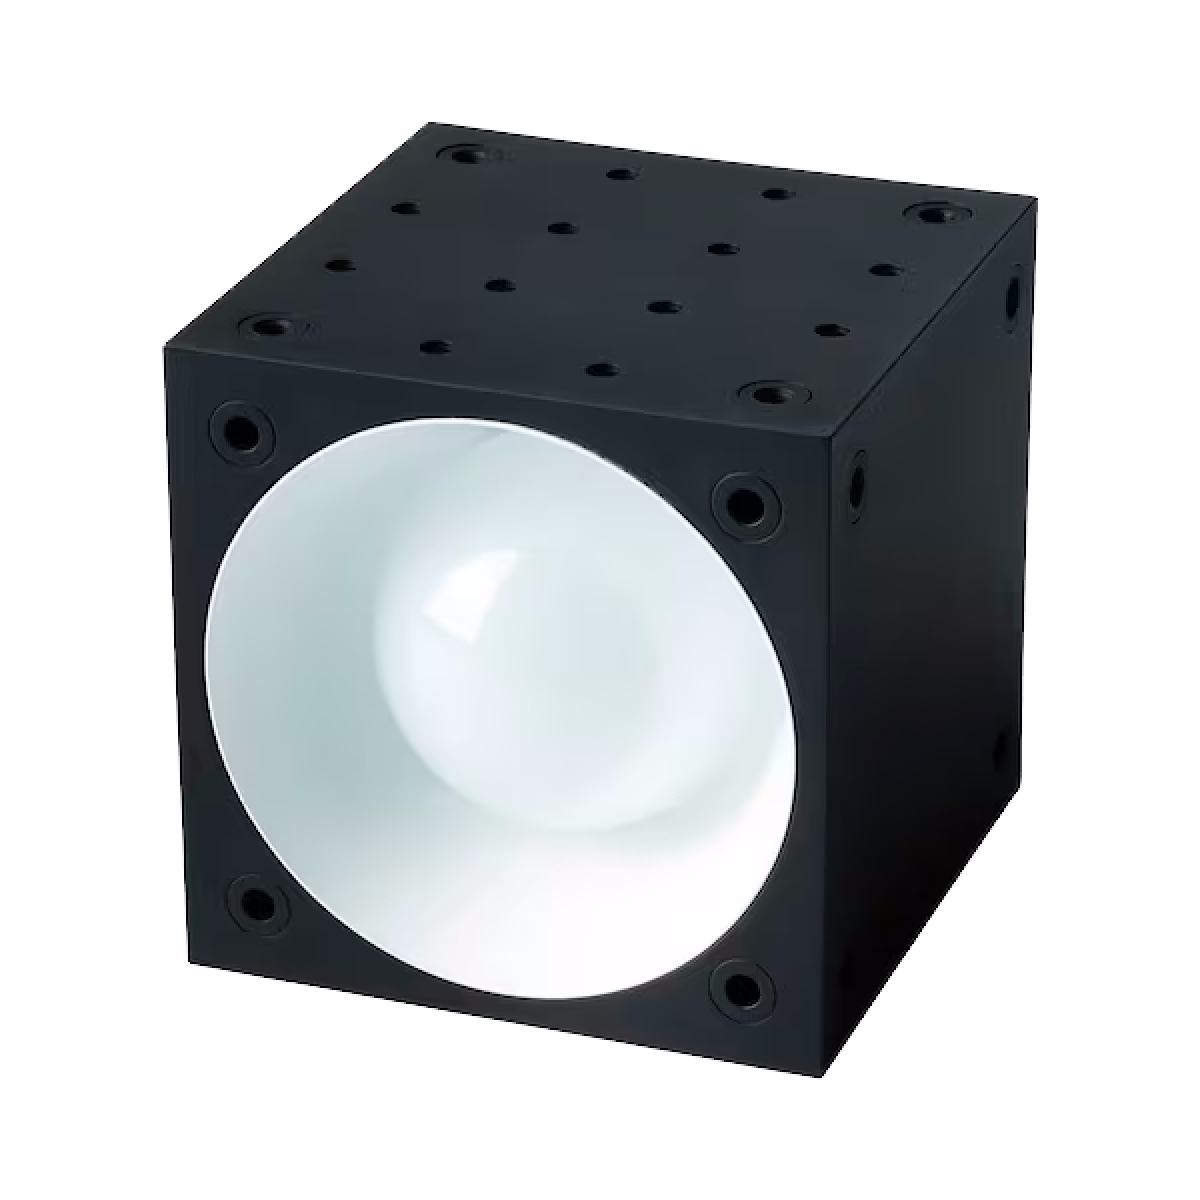 An IKEA square, black speaker that also doubles as a lamp